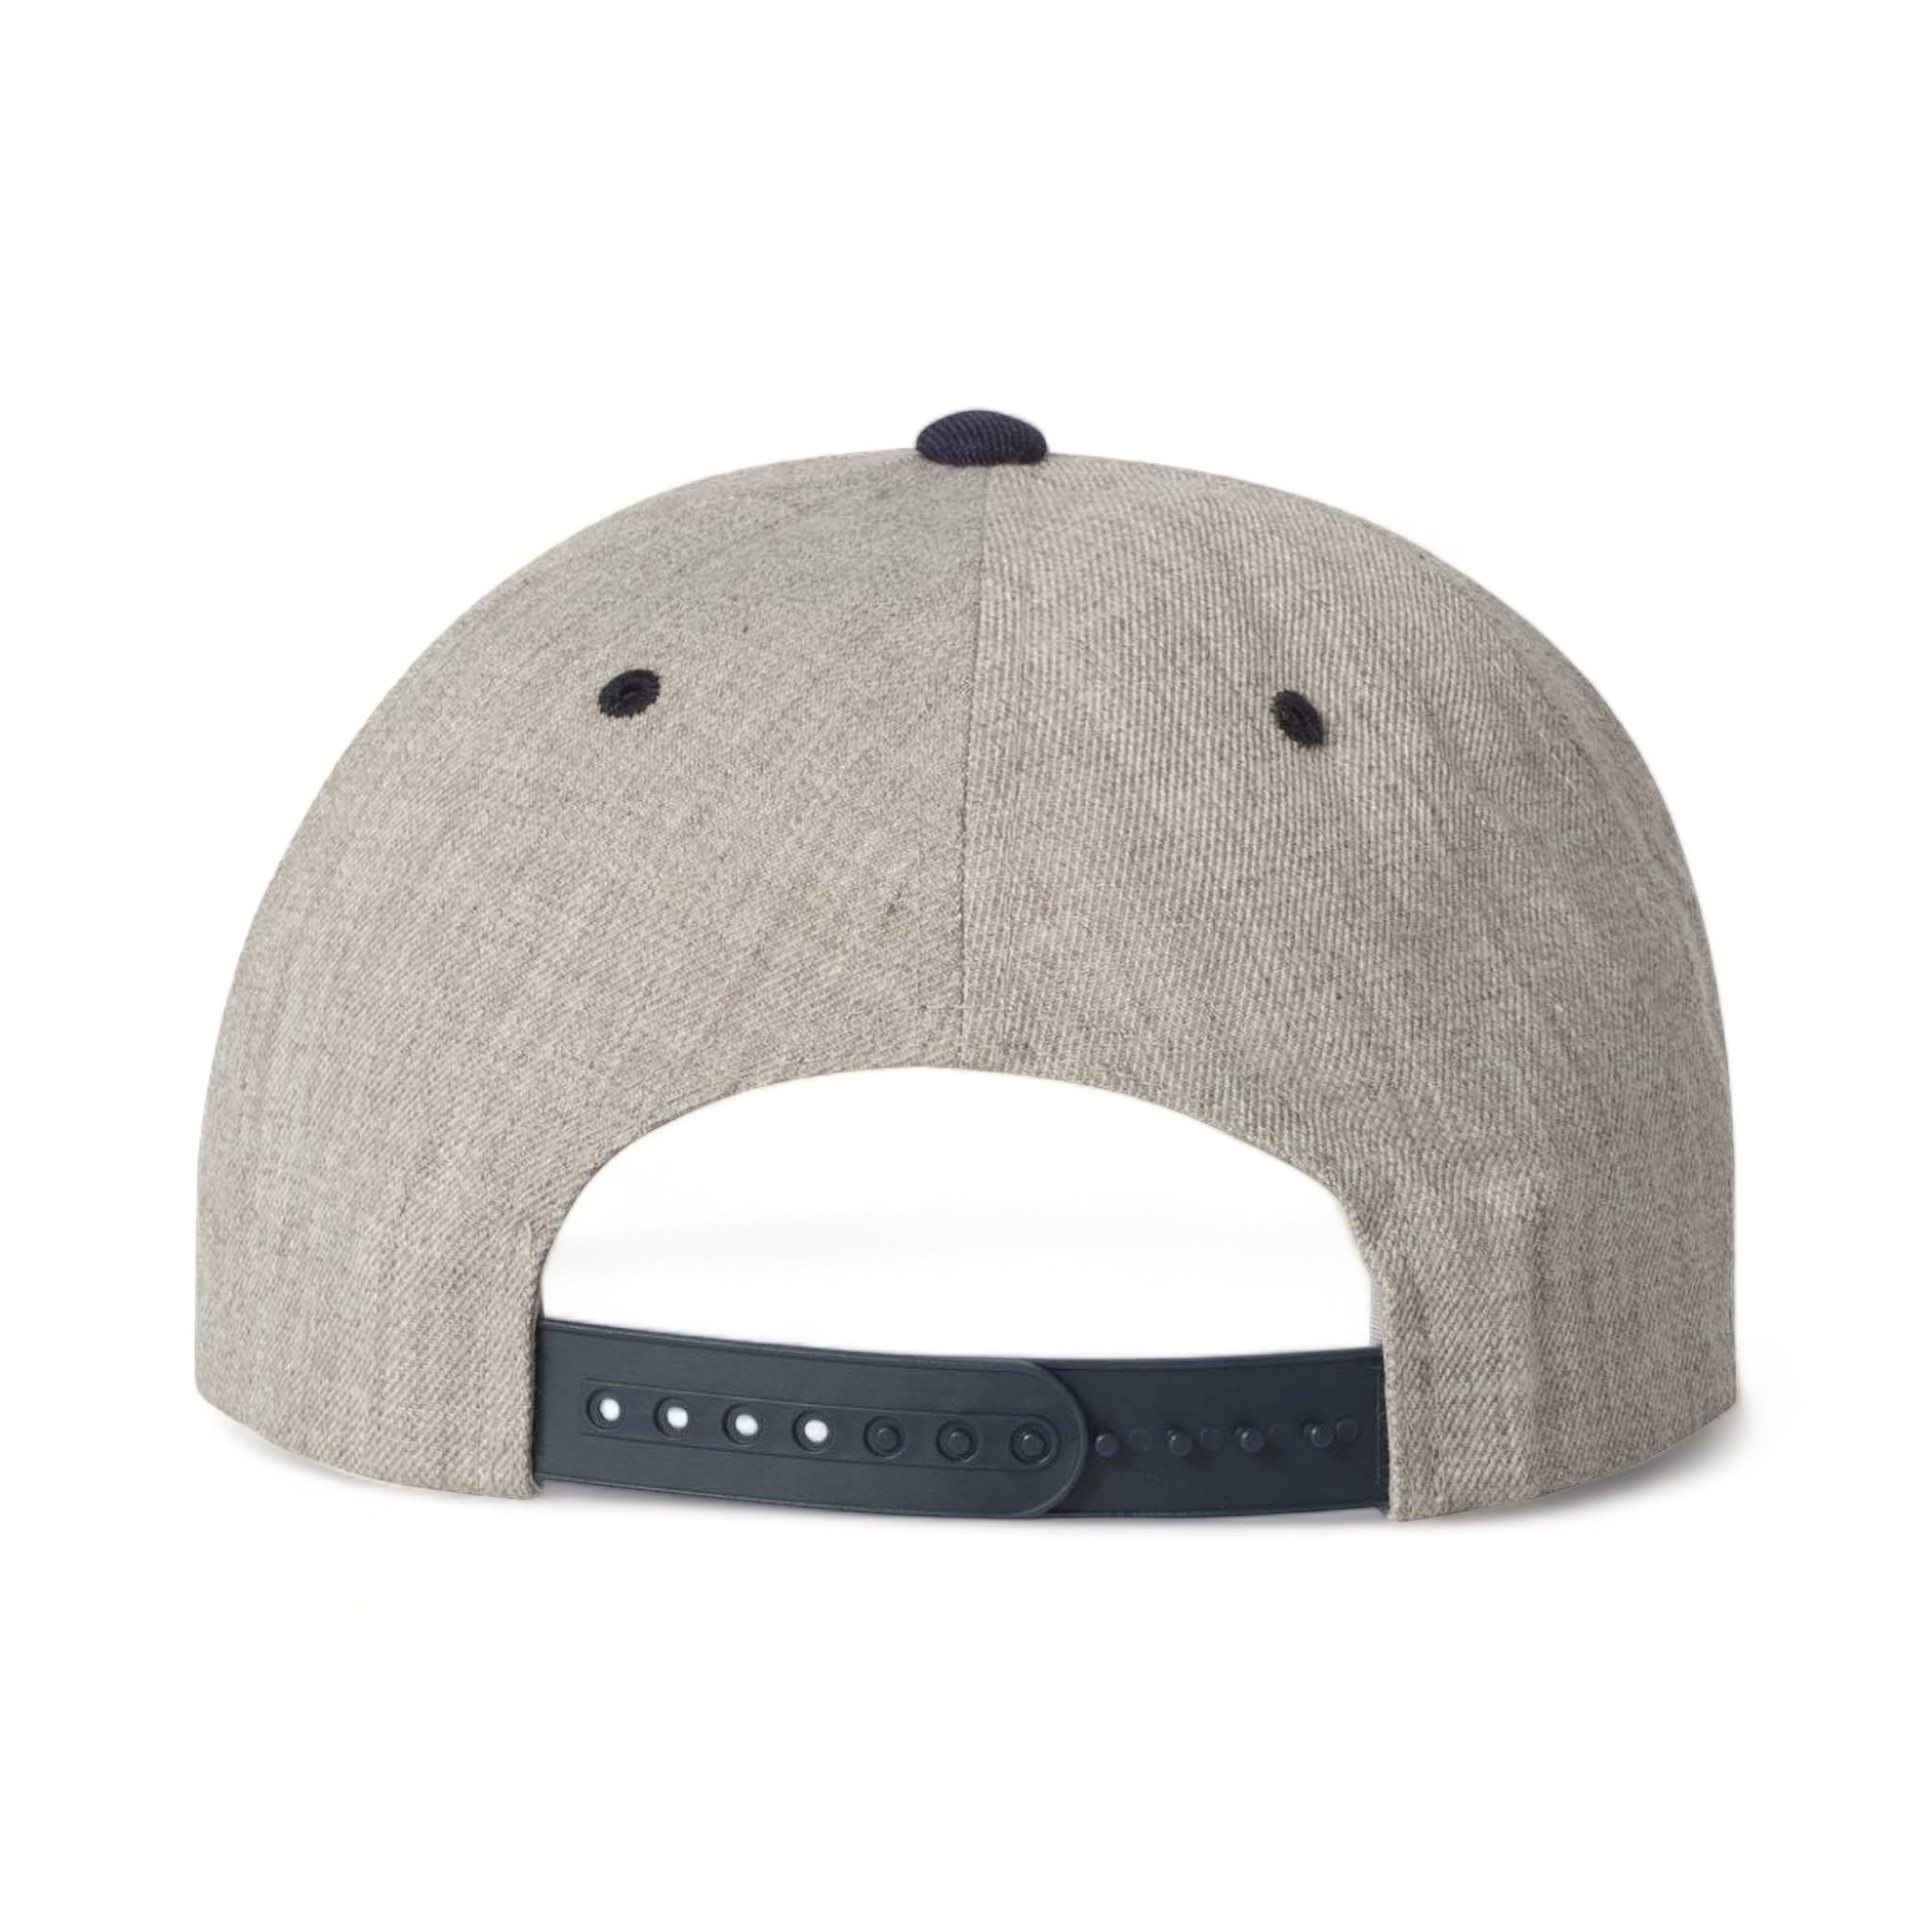 Back view of YP Classics 6089M custom hat in heather grey and navy